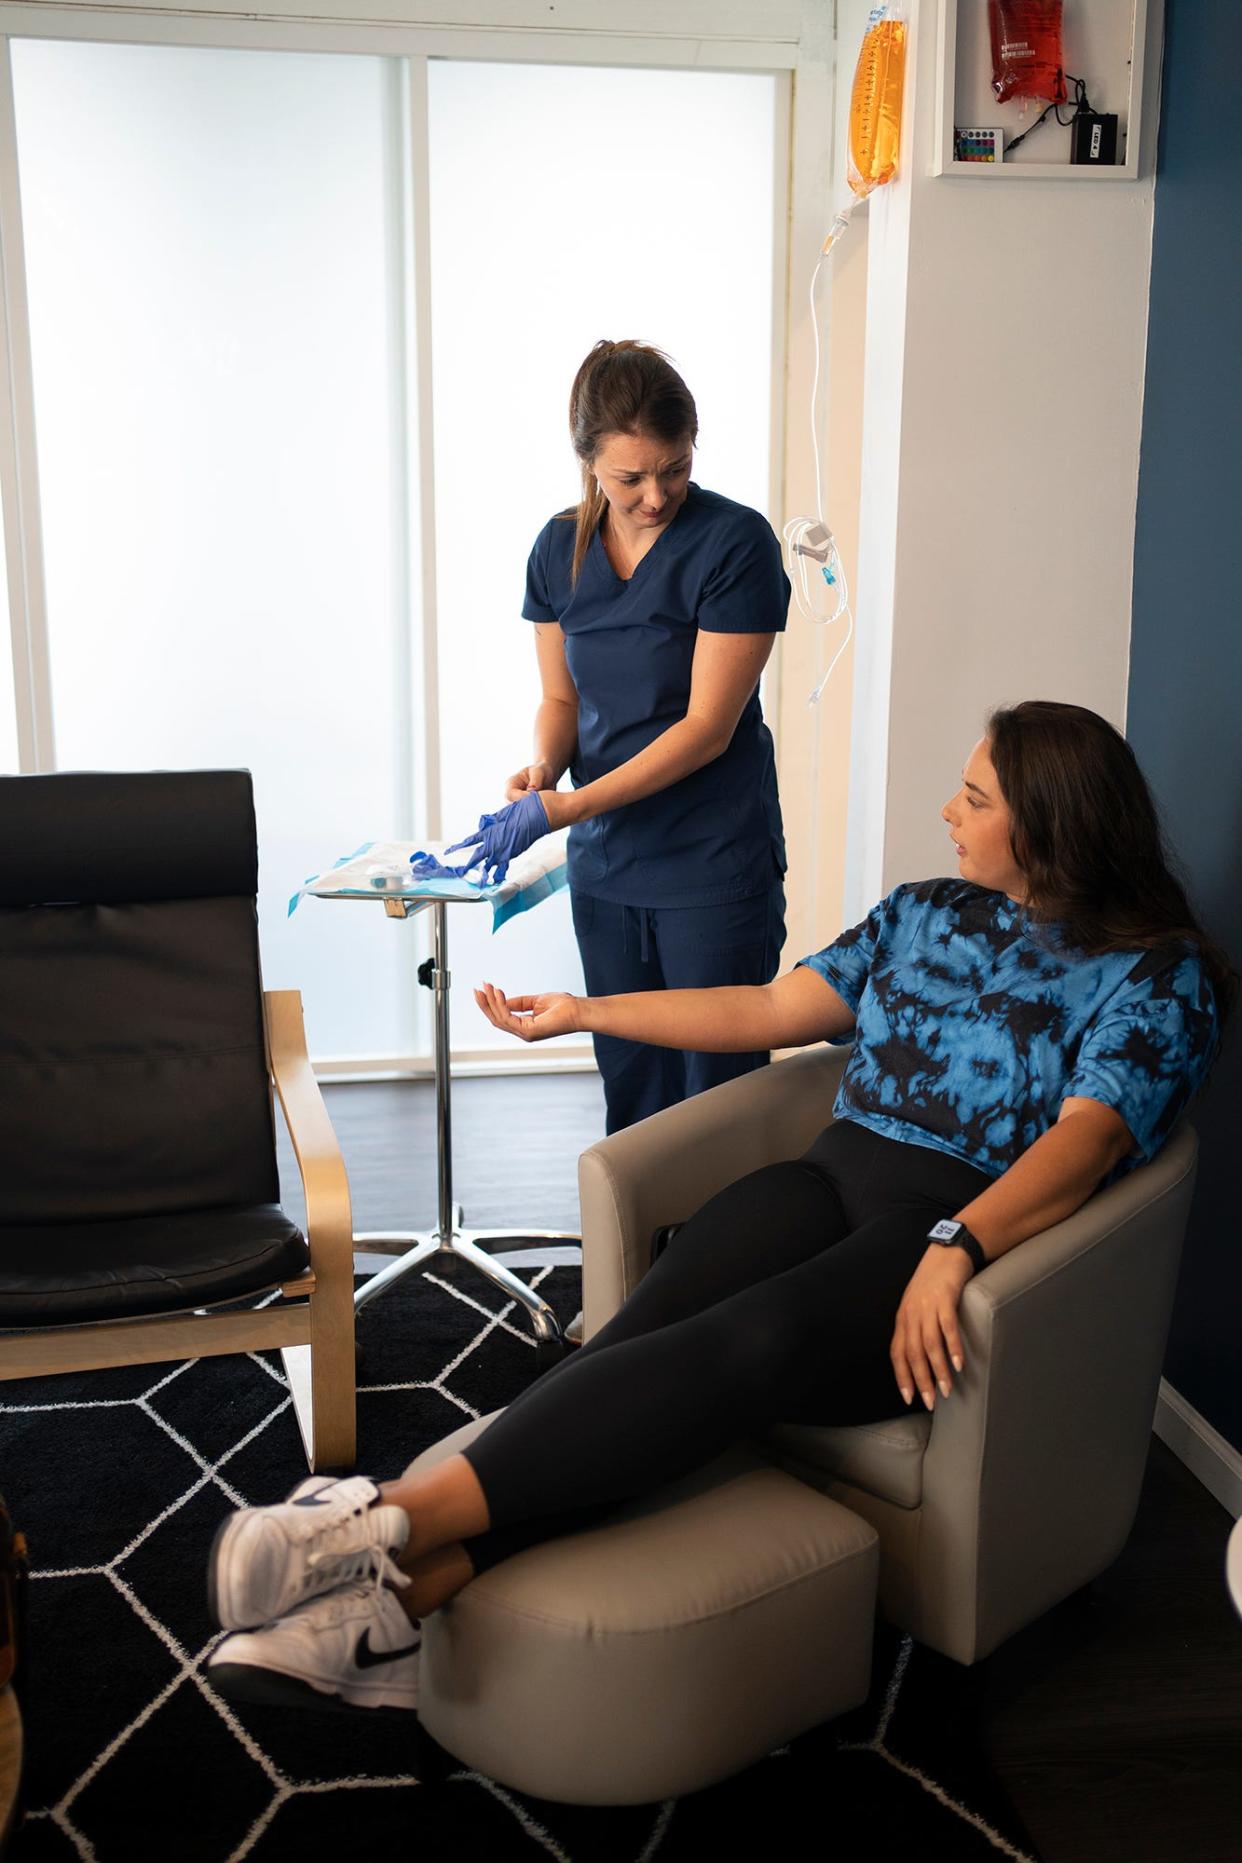 Nurse Tori Hymiller prepares to put a "Refresh" IV in Andrea Spencer, 29, at Wellness Flow, a new IV therapy studio that opened in the Short North in July.